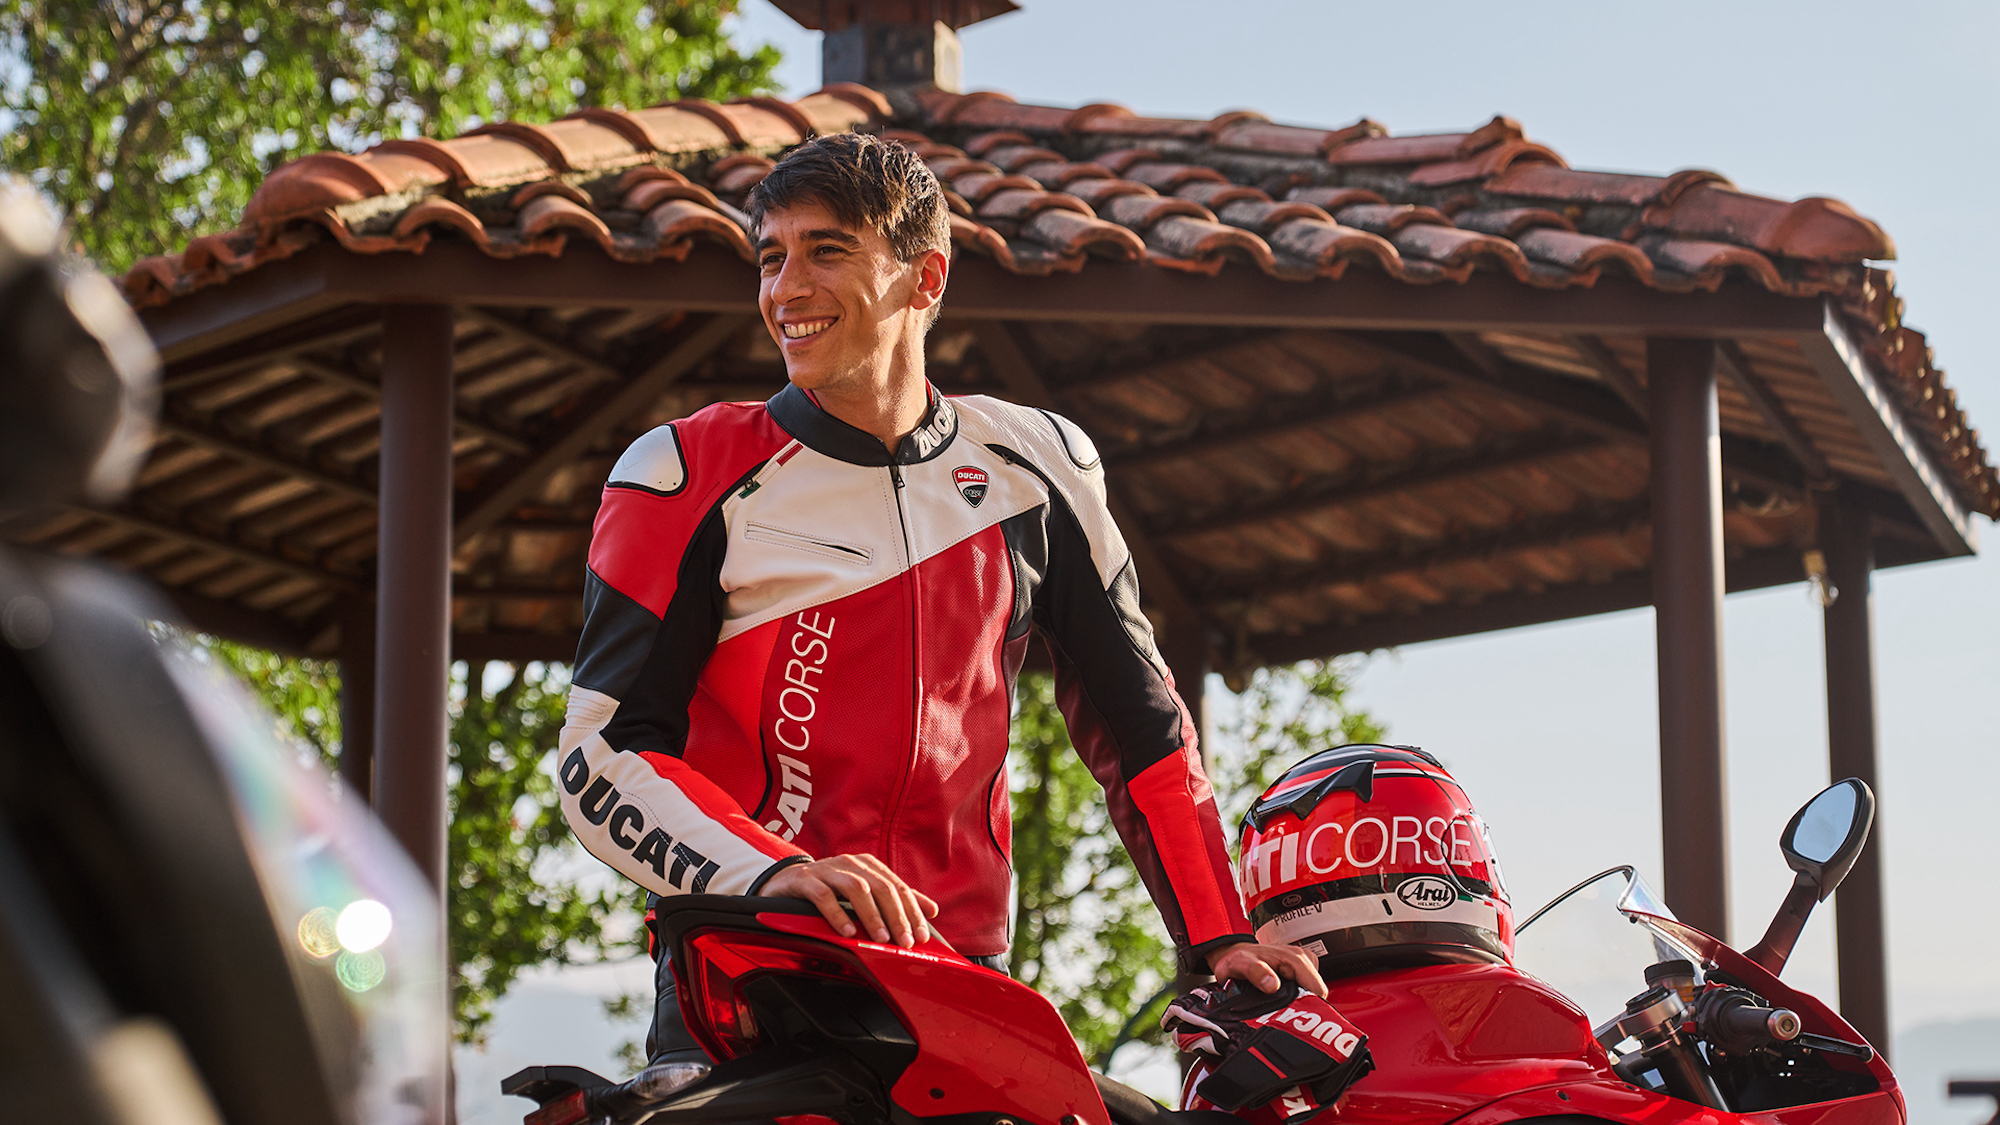 A view of Ducati's 2023 Apparel Collections. Media sourced from Ducati.